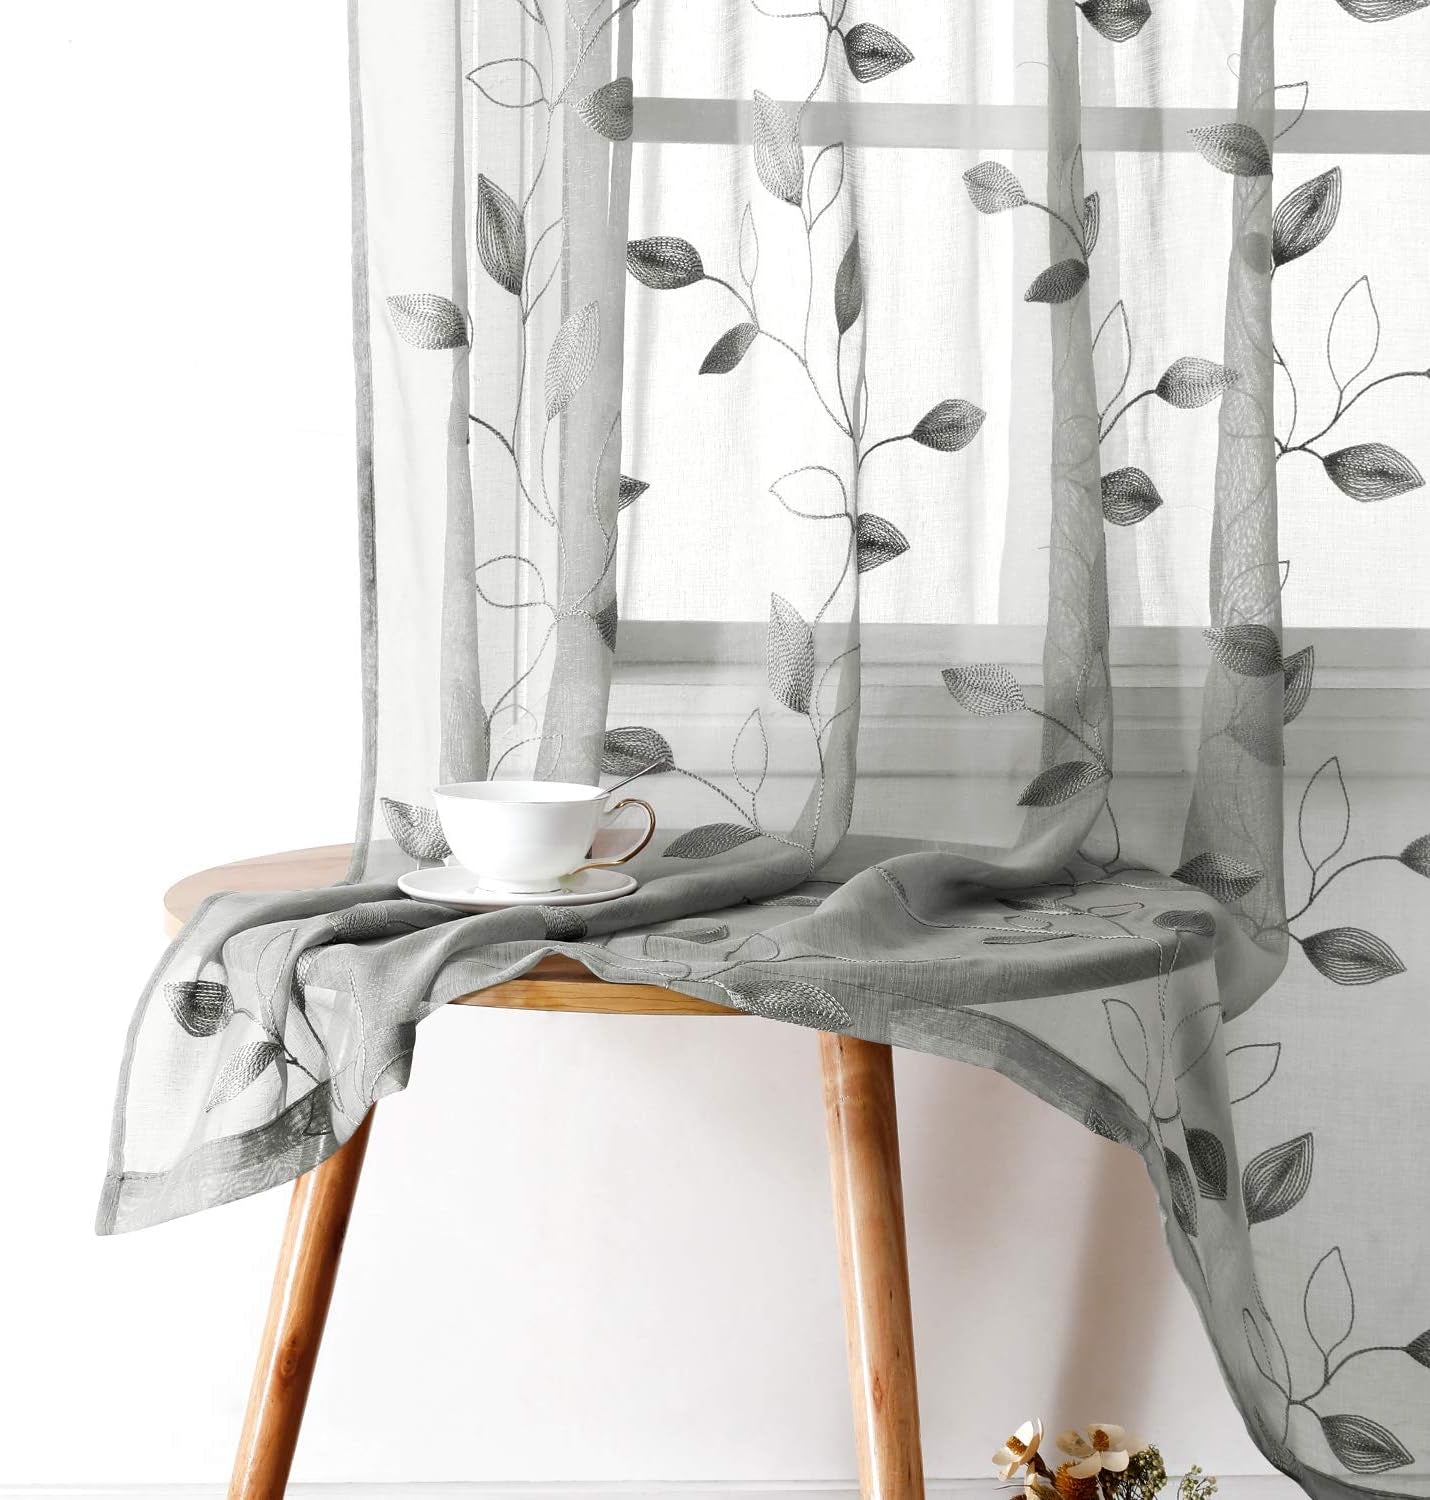 HOMEIDEAS Sage Green Sheer Curtains 52 X 63 Inches Length 2 Panels Embroidered Leaf Pattern Pocket Faux Linen Floral Semi Sheer Voile Window Curtains/Drapes for Bedroom Living Room  HOMEIDEAS 3-Grey W52" X L63" 